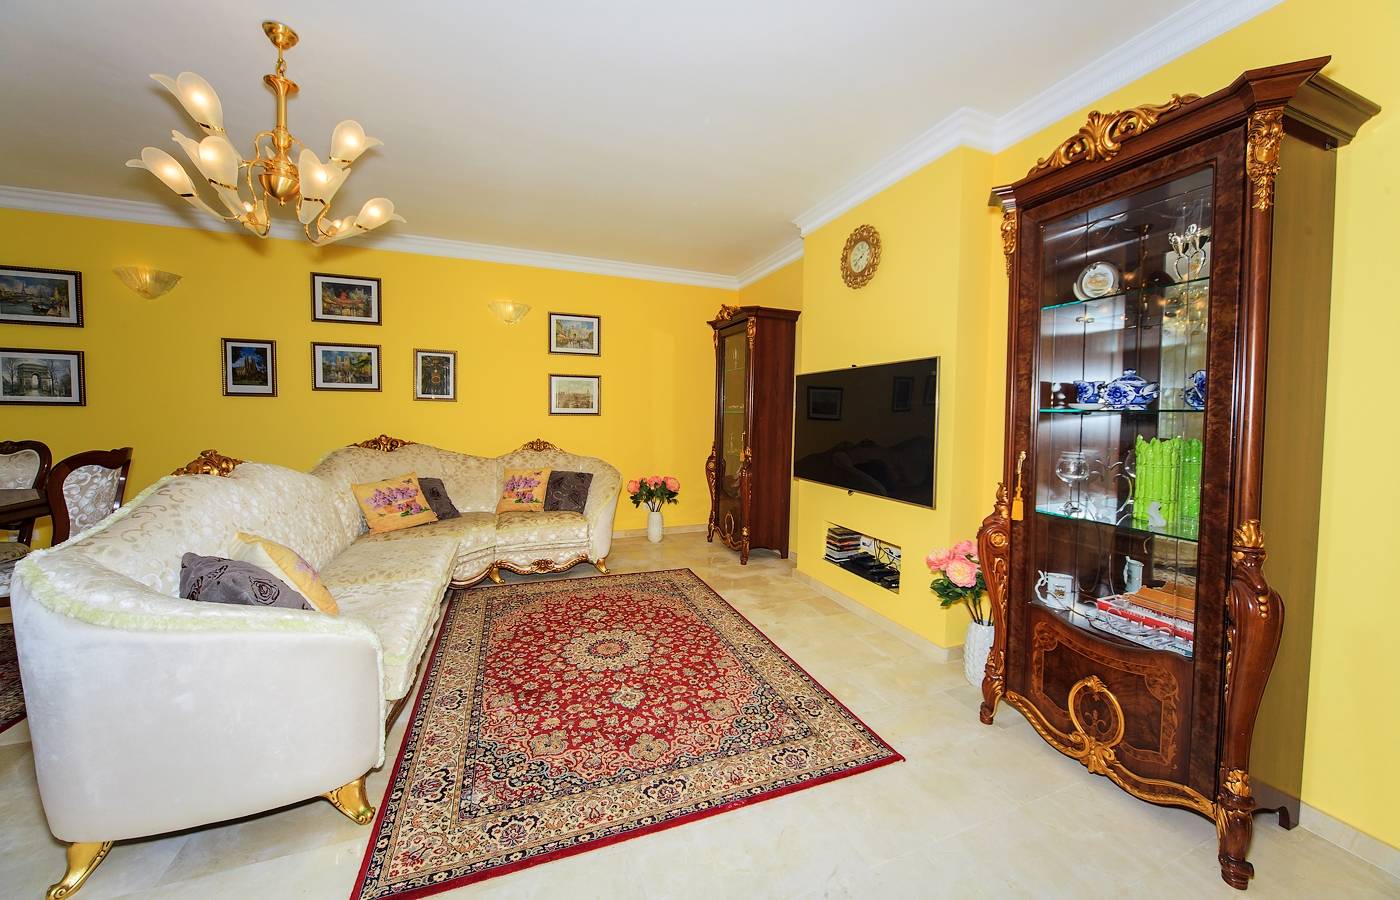 BEAUTIFUL INDEPENDENT VILLA WITH POOL AND WELL-KEPT PLOT IN PUNTA PRIMA